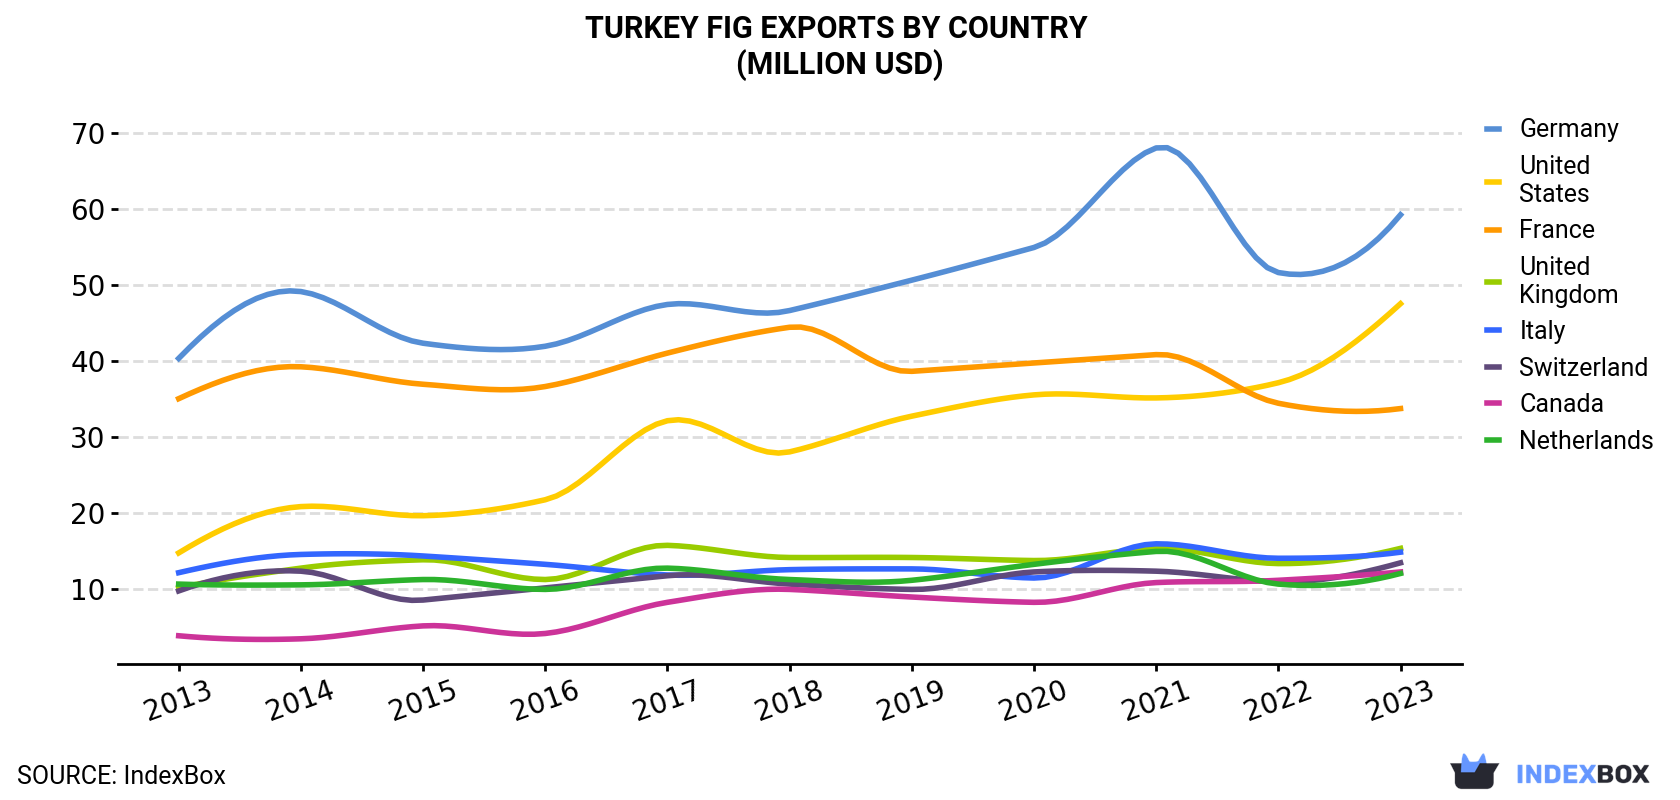 Turkey Fig Exports By Country (Million USD)